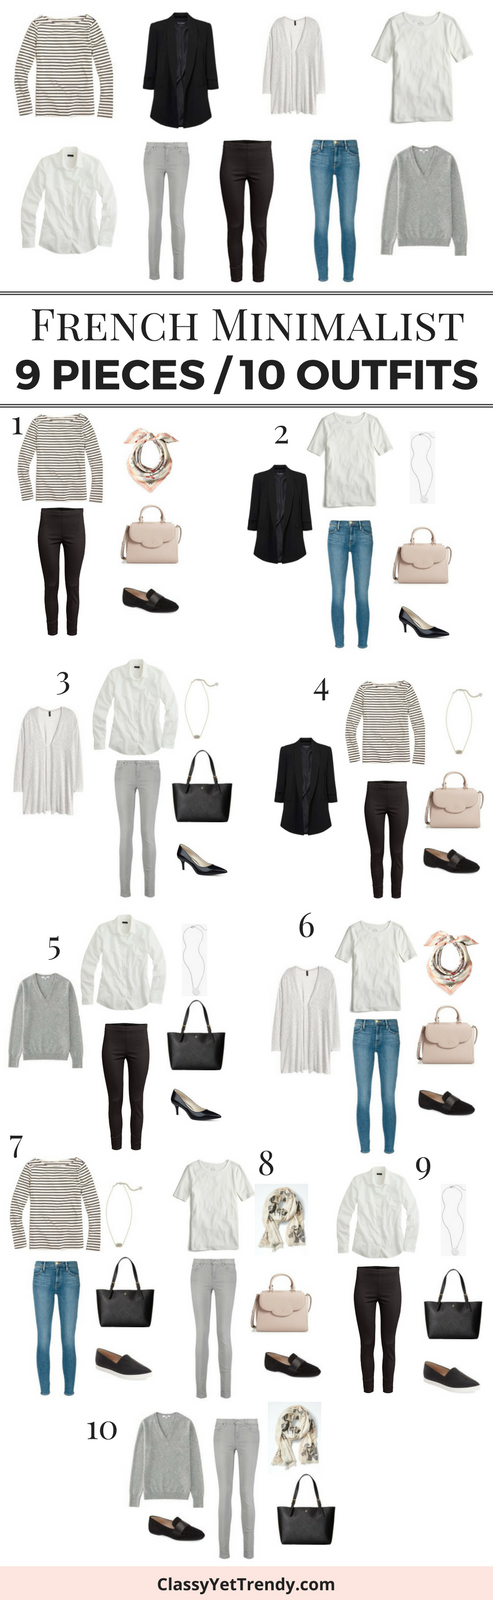 Turn 9 basic essentials in your closet into 10 outfits, French Minimalist sryle!   These 9 tops, pants and jeans are classic and